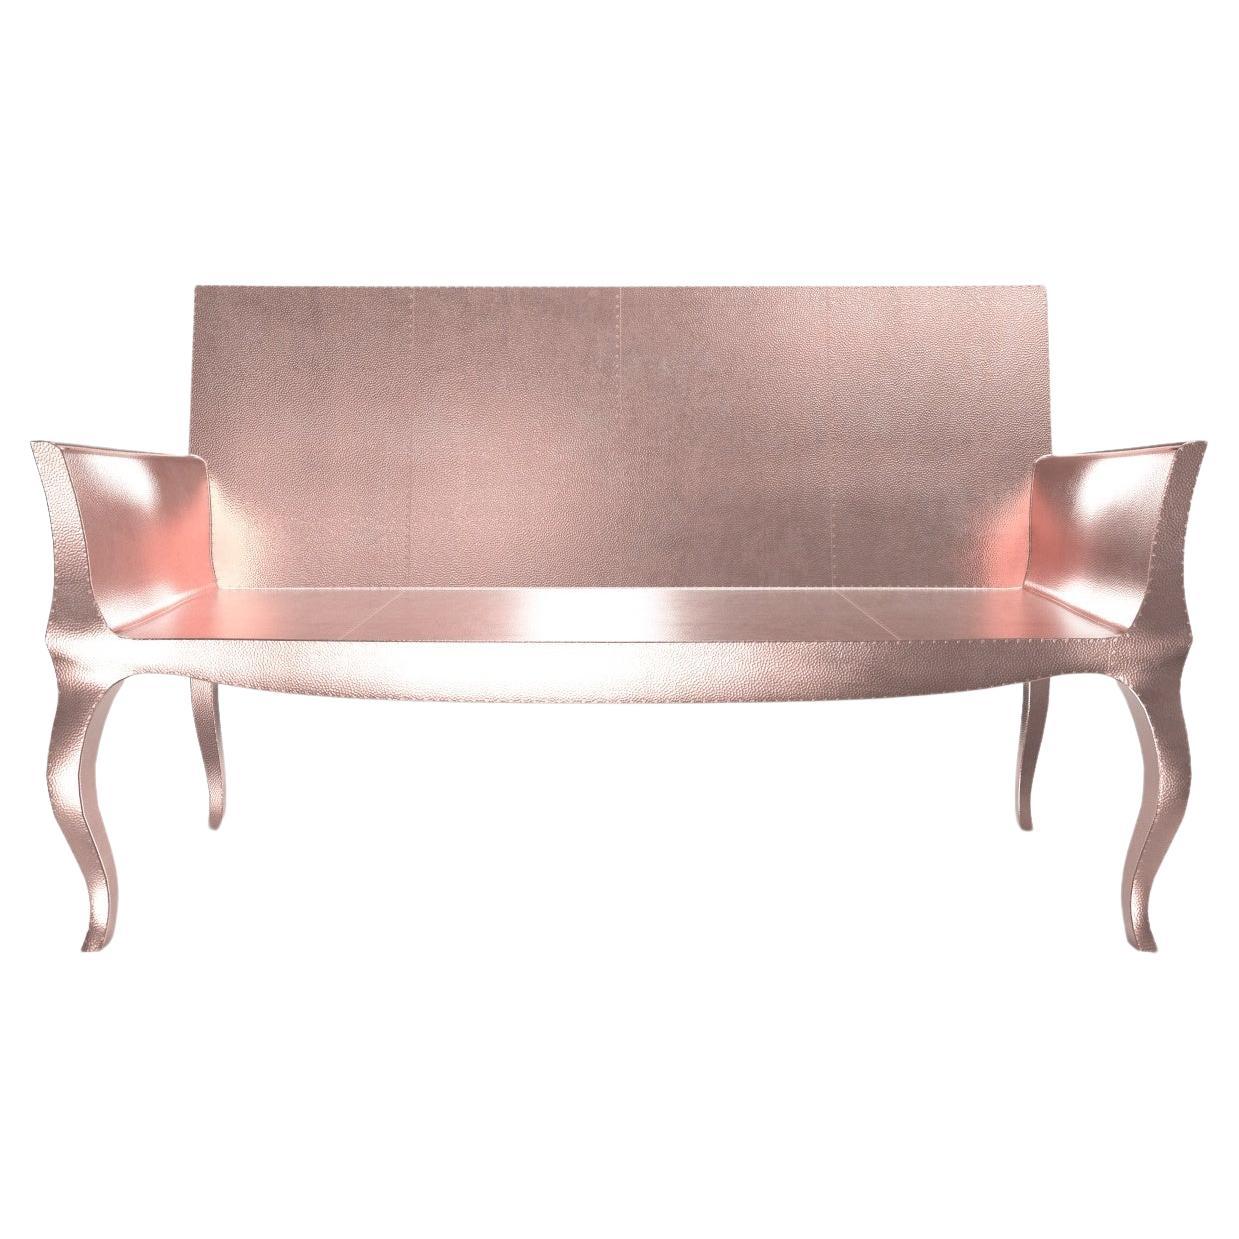 Louise Settee Art Deco Settees in Mid. Hammered Copper by Paul Mathieu For Sale